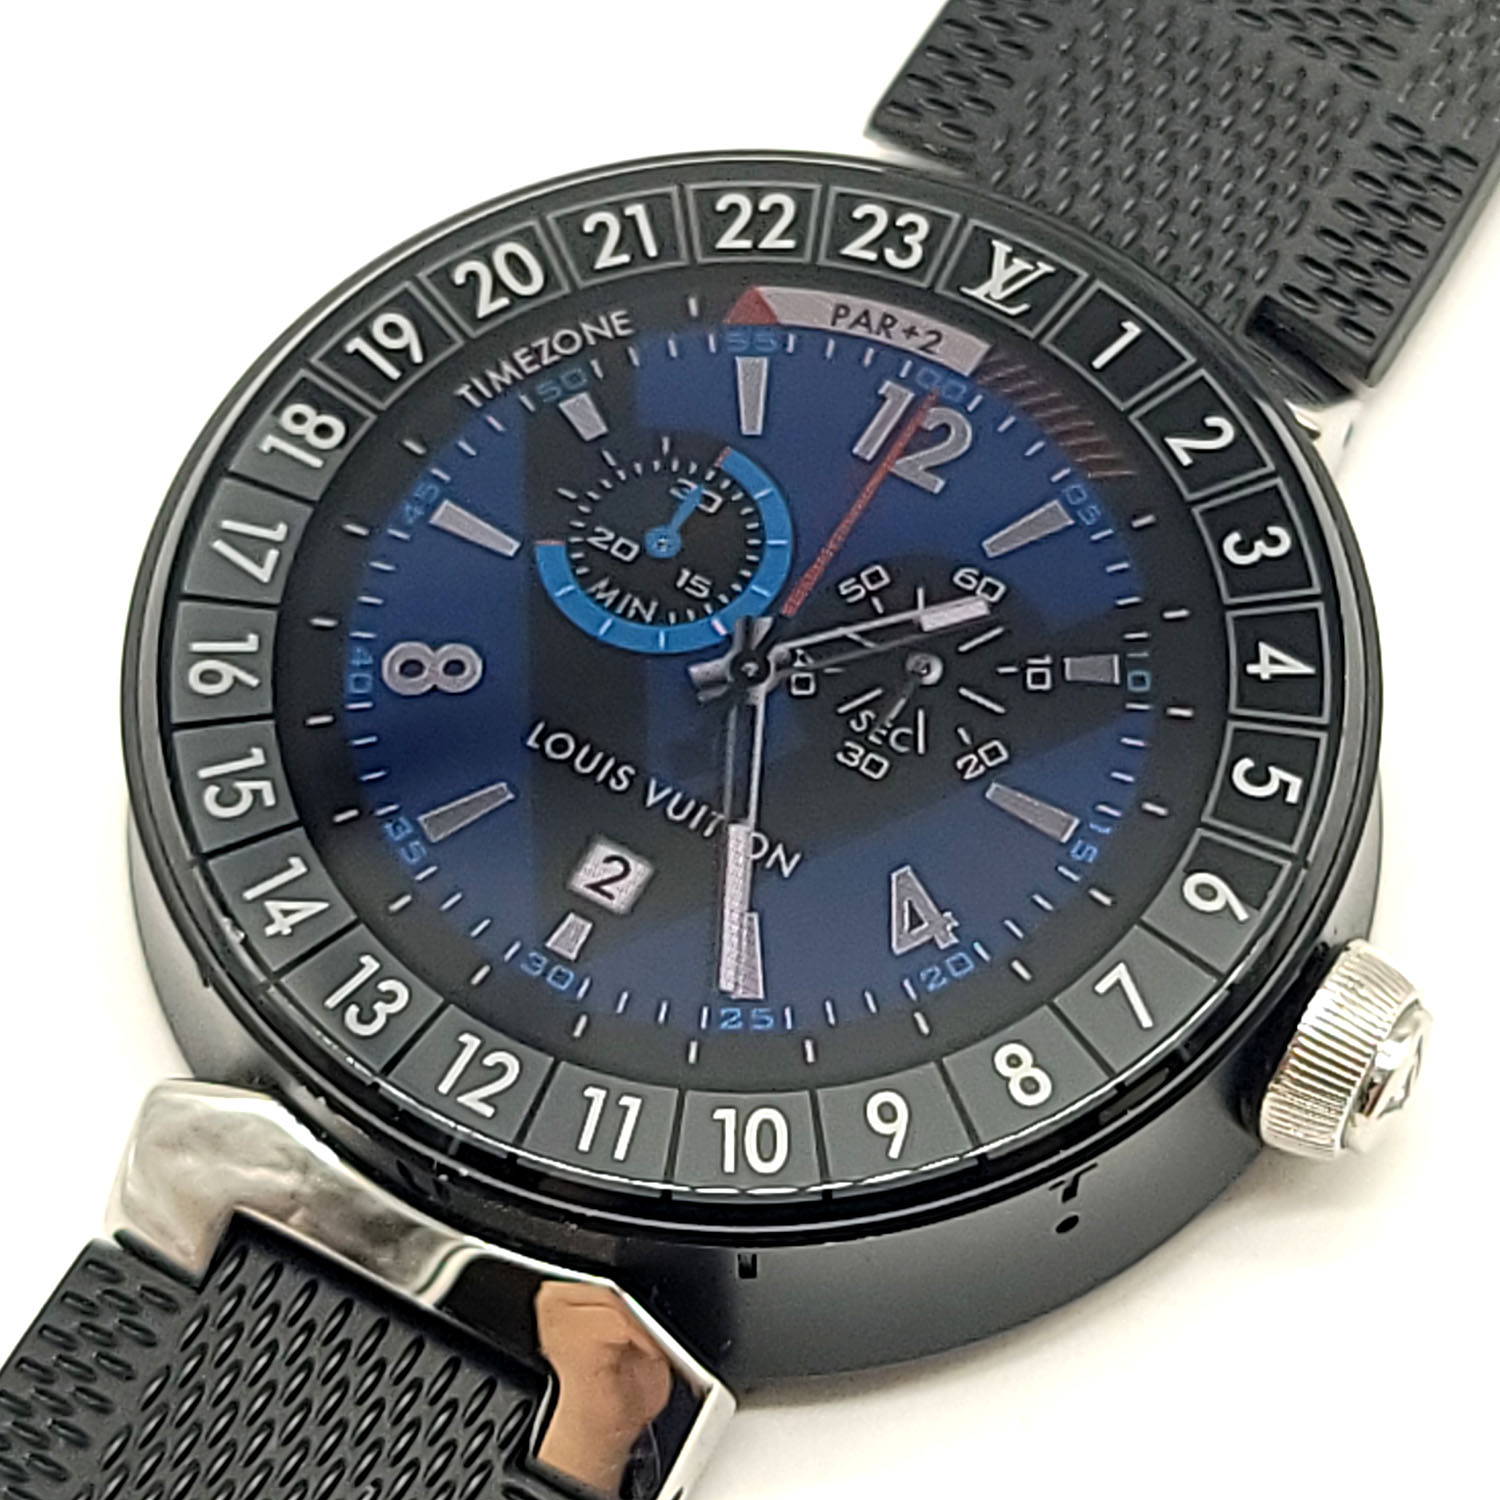 Louis Vuitton Tambour Horizon 2nd Generation for $1,350 for sale from a  Private Seller on Chrono24